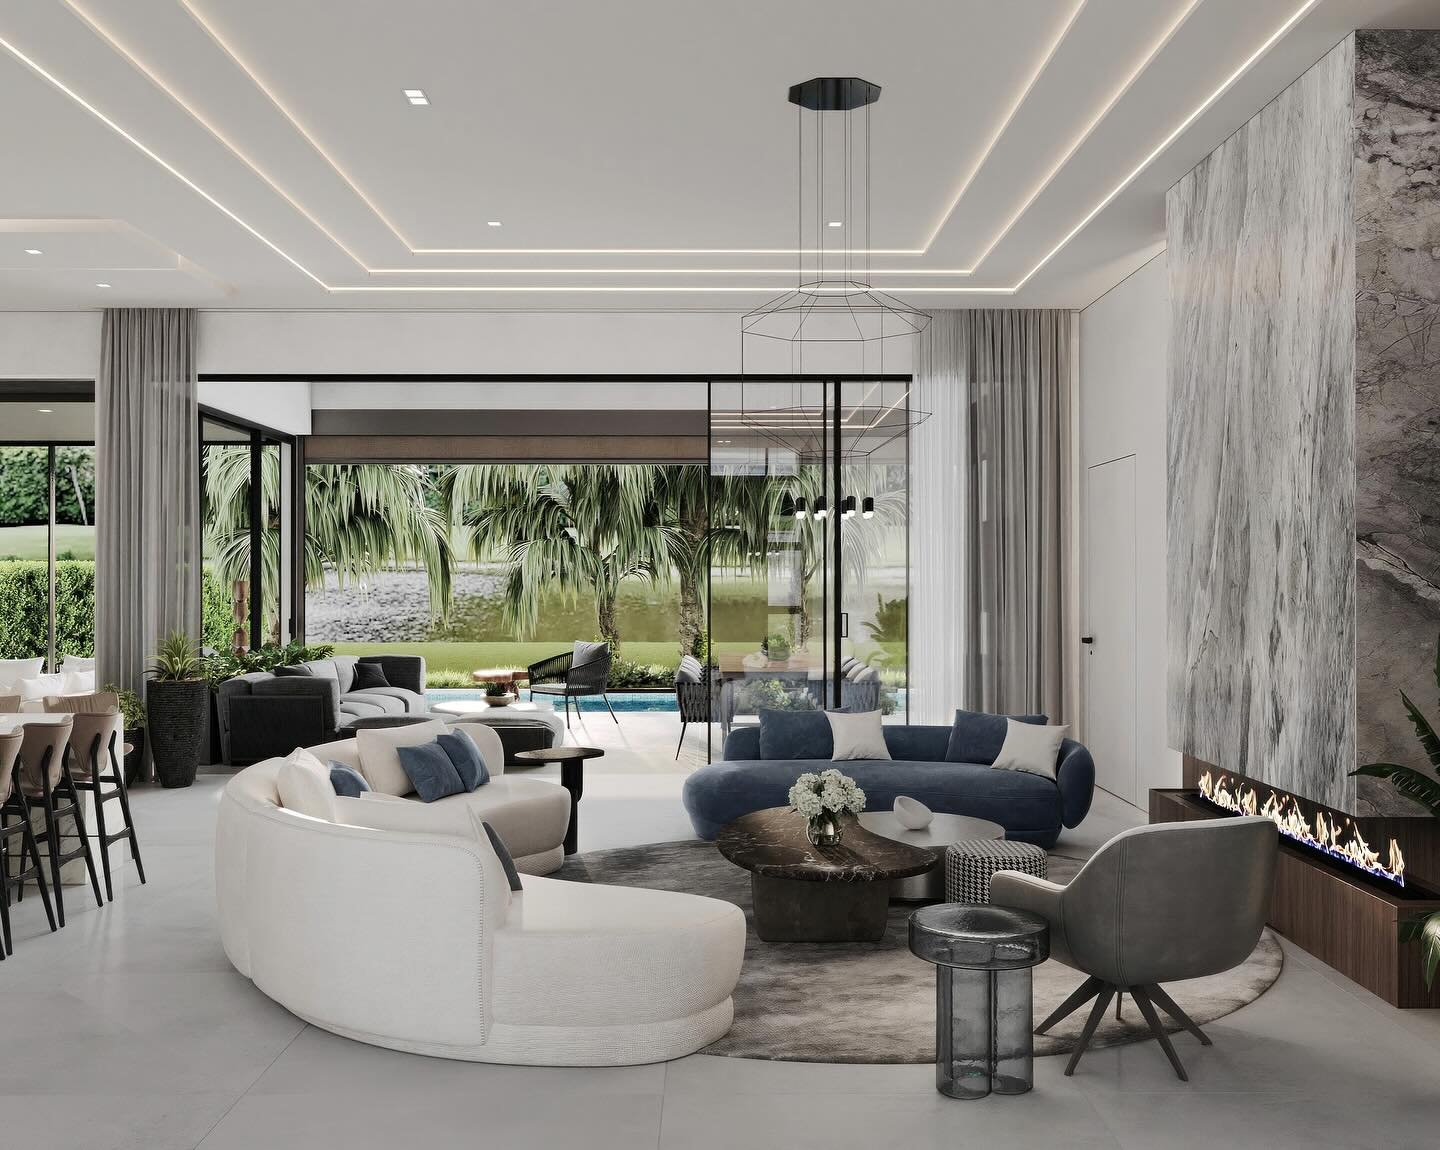 Full home renovation starting with this formal living room. A great representation of luxury living tailored to our clients. 

#marionpigeotdesigns #interiordesigner #moderninterior #bocaratoninteriordesign #interiorinspiration #designmiami #bathroom